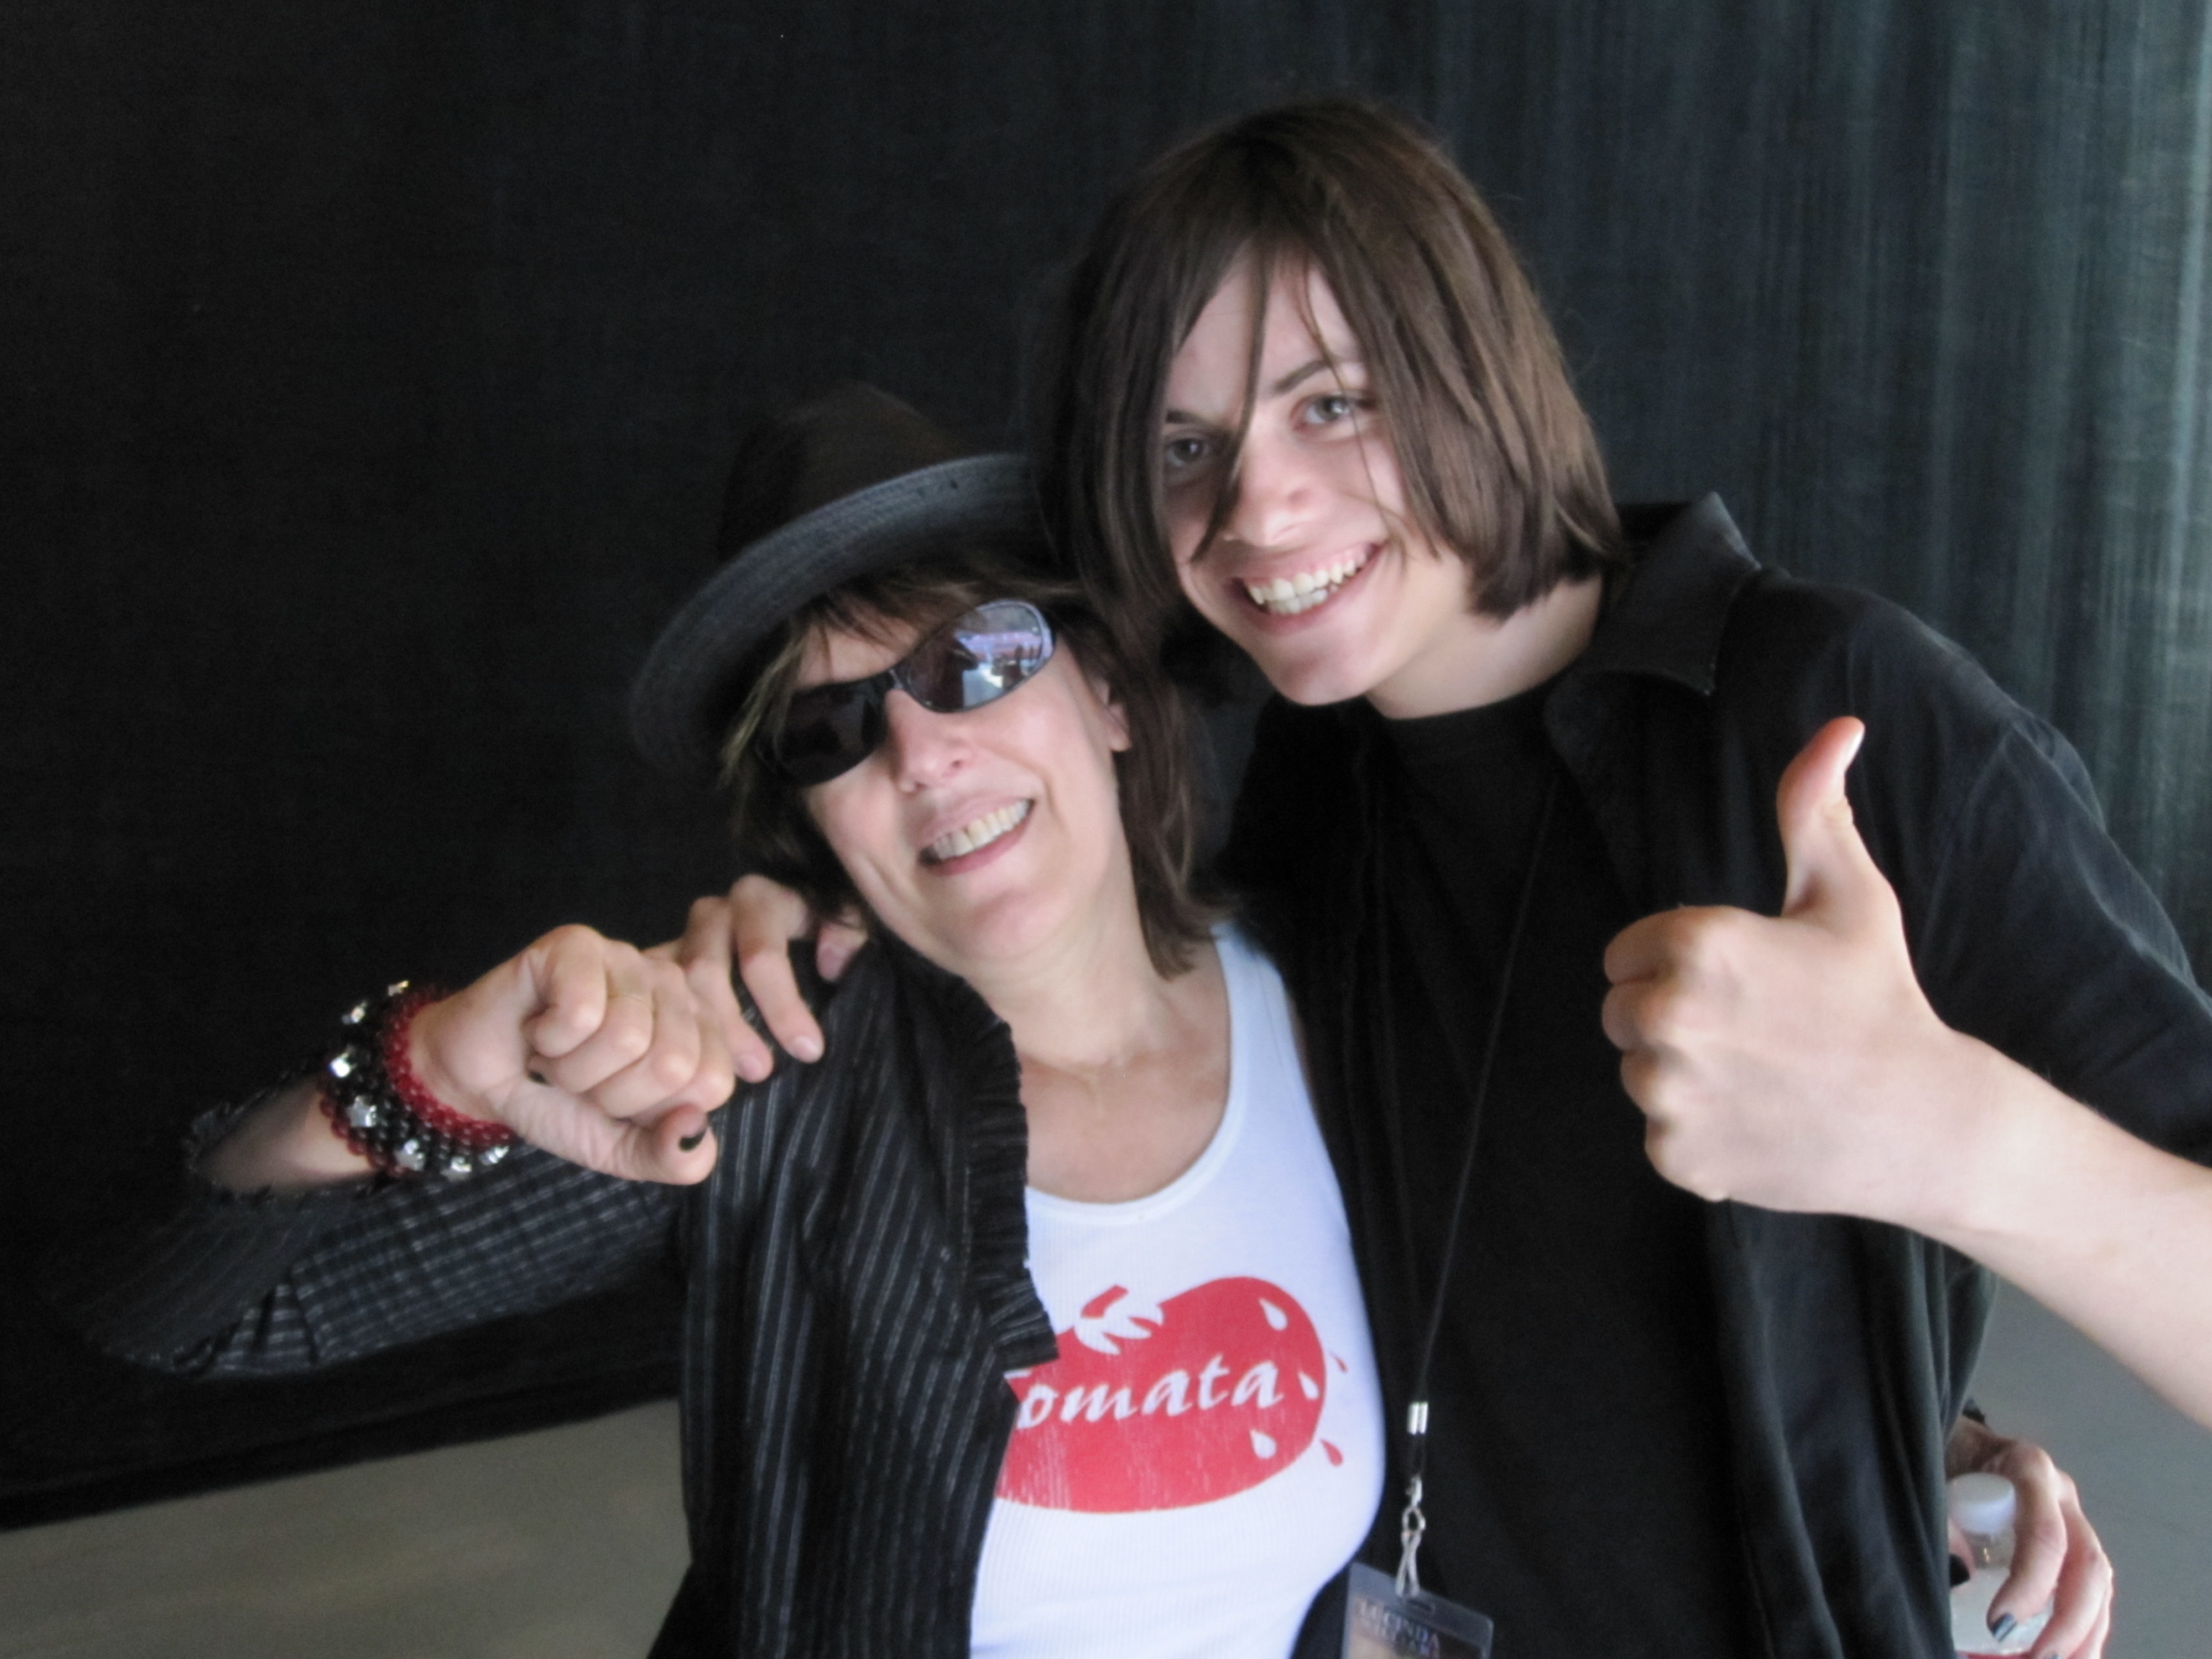 Nathan Norton was a drum tech for Lucinda Williams' 2007 tour. Lucinda Williams & Nathan Norton backstage at The Greek.